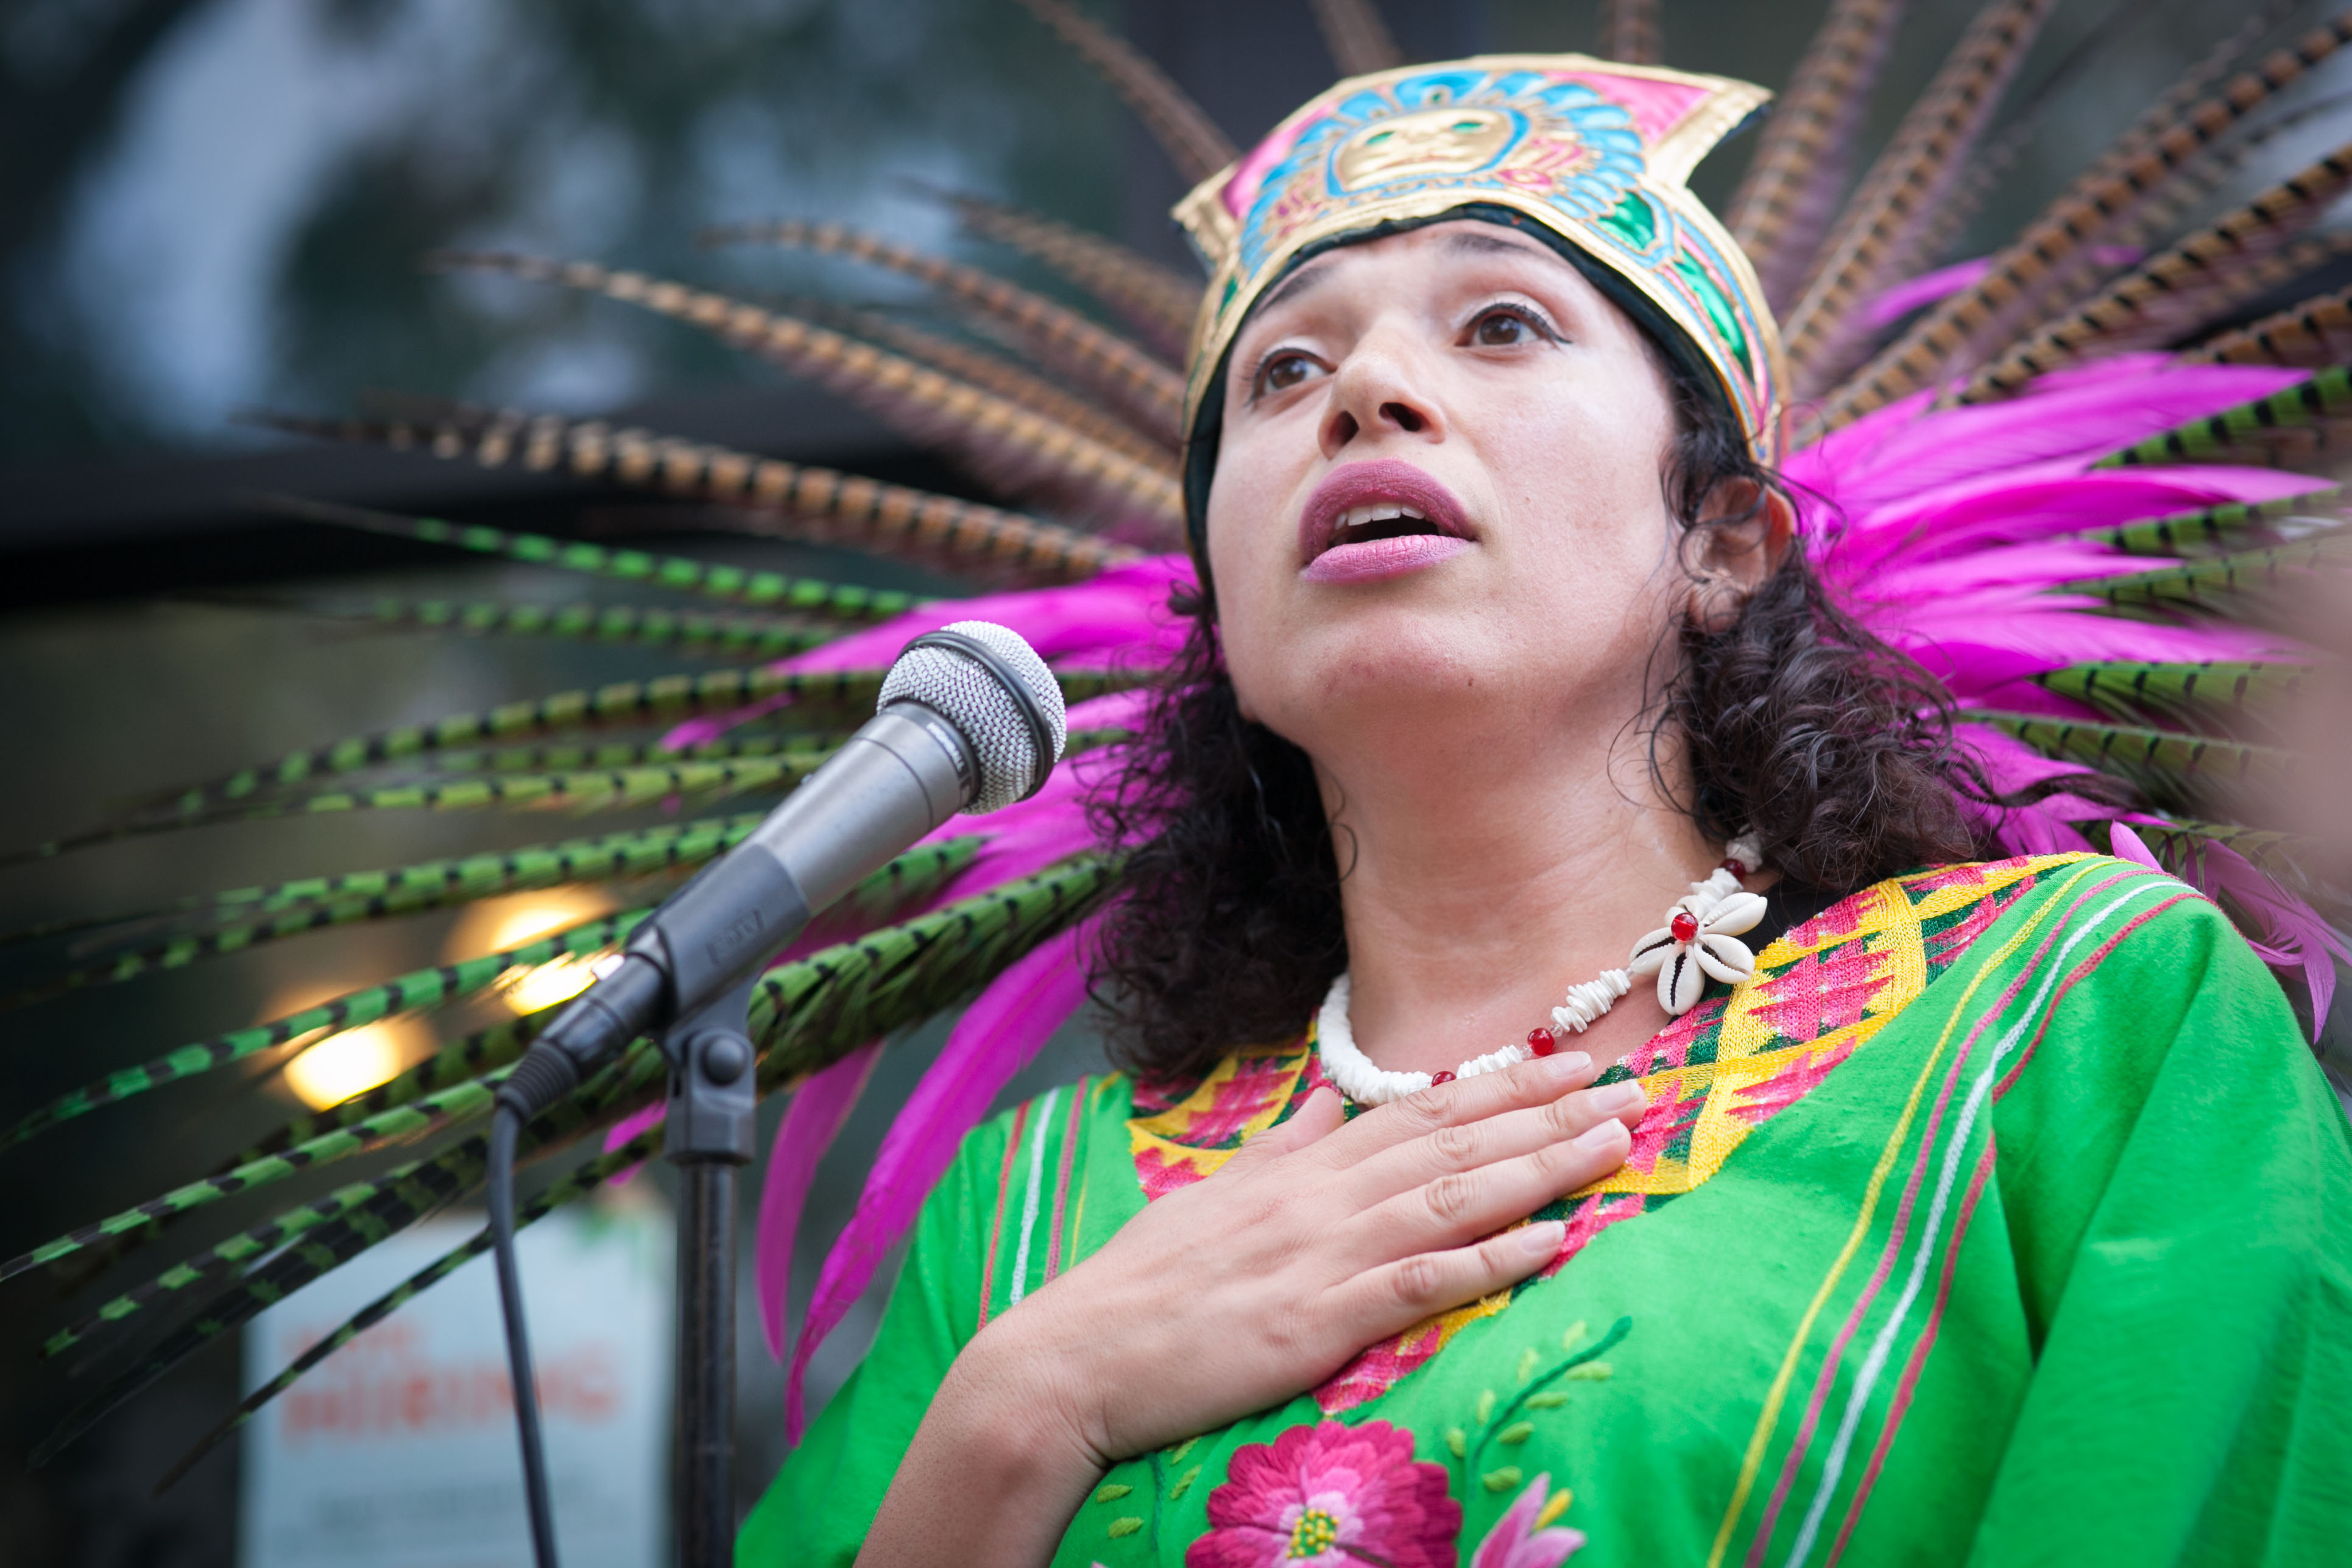 Traditional dancer Blanca Rodriguez of Xiuhcoatl Danza Azteca speaks to the crowd during a celebration of the mural project’s opening, at the corner of 24th and Folsom streets on Saturday, Aug. 8, 2015. (Photo by Ekevara Kitpowsong/The Guardsman)